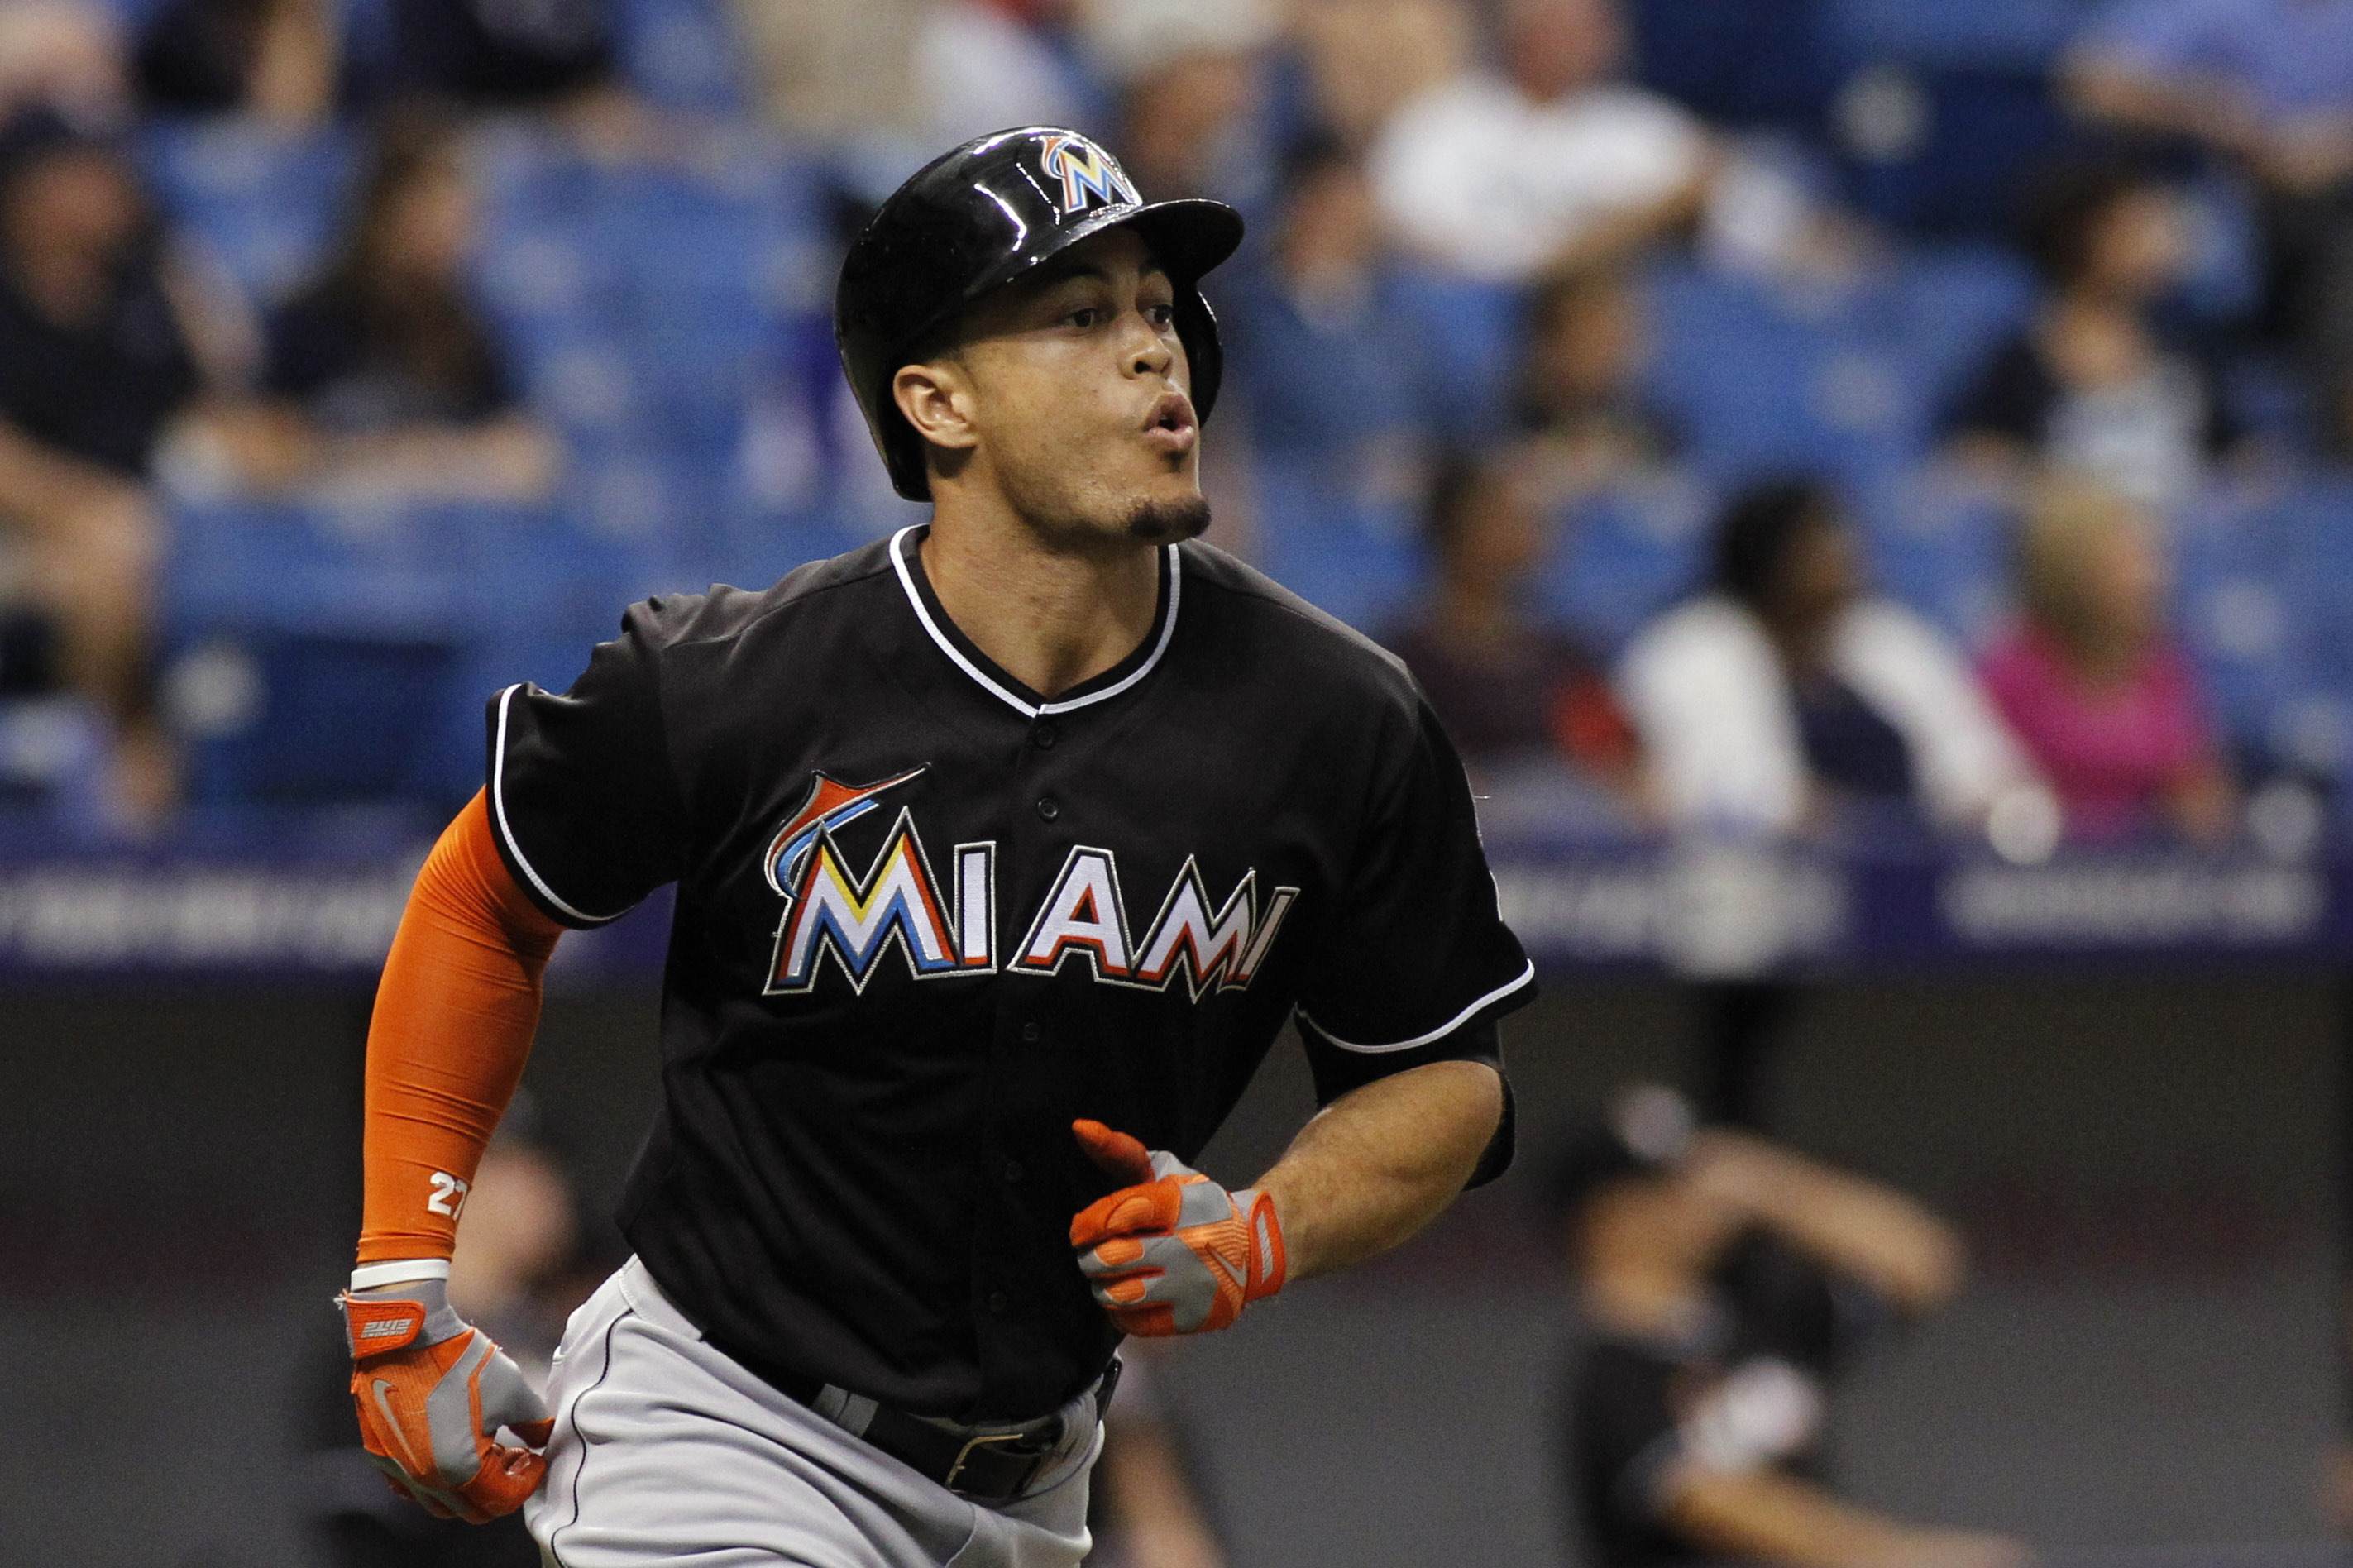 Former MLB player backs Giancarlo Stanton as uncertainty looms around  Yankees hitter's future: There will be 25 other teams ready to pick him up”